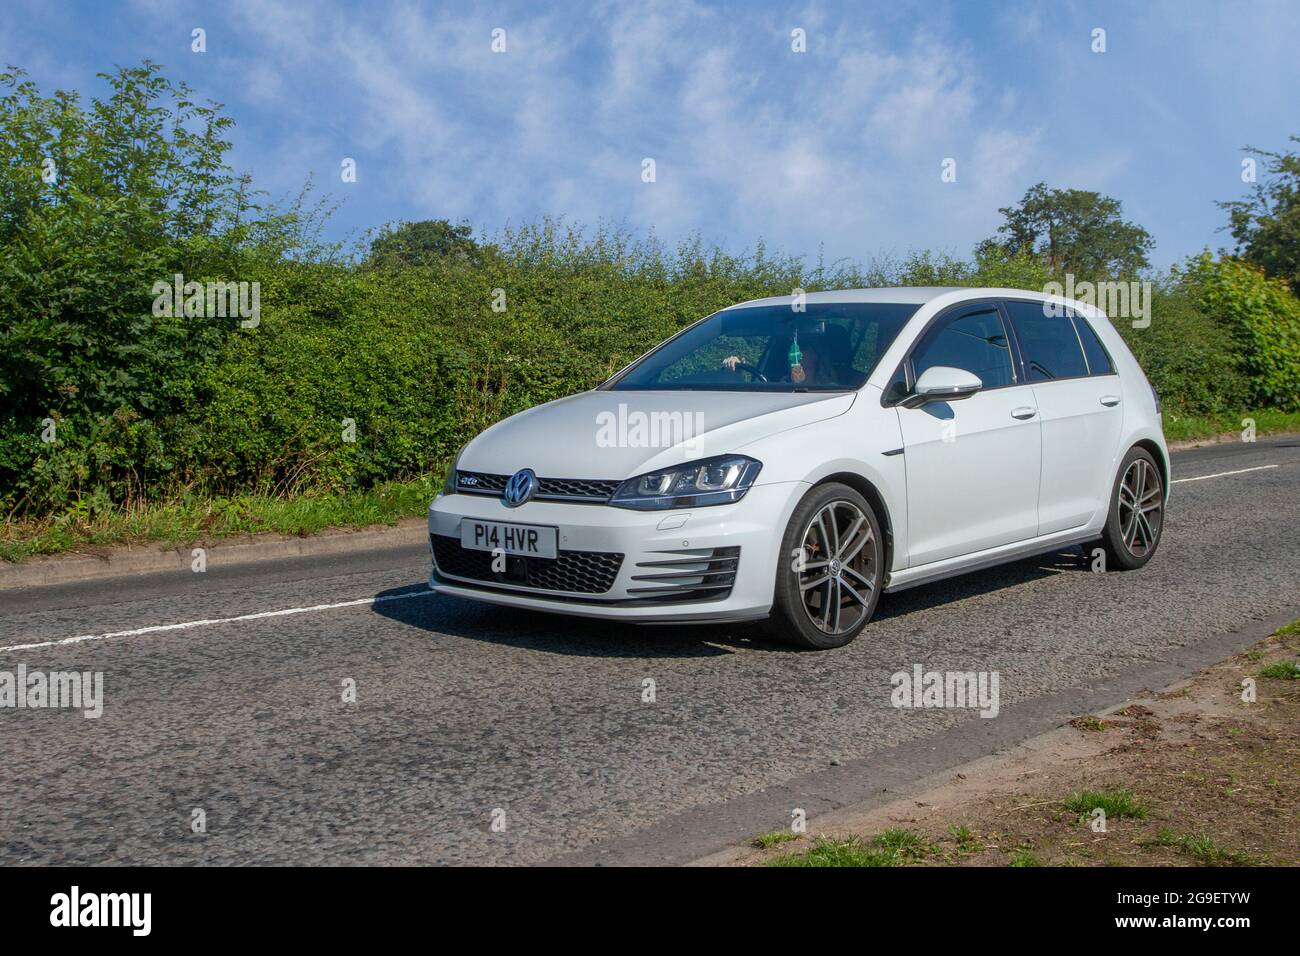 2015 blanc Volkswagen Golf GTD 6 SPEED Manual 4dr en route vers Capesthorne Hall Classic July car show, Cheshire, Royaume-Uni Banque D'Images